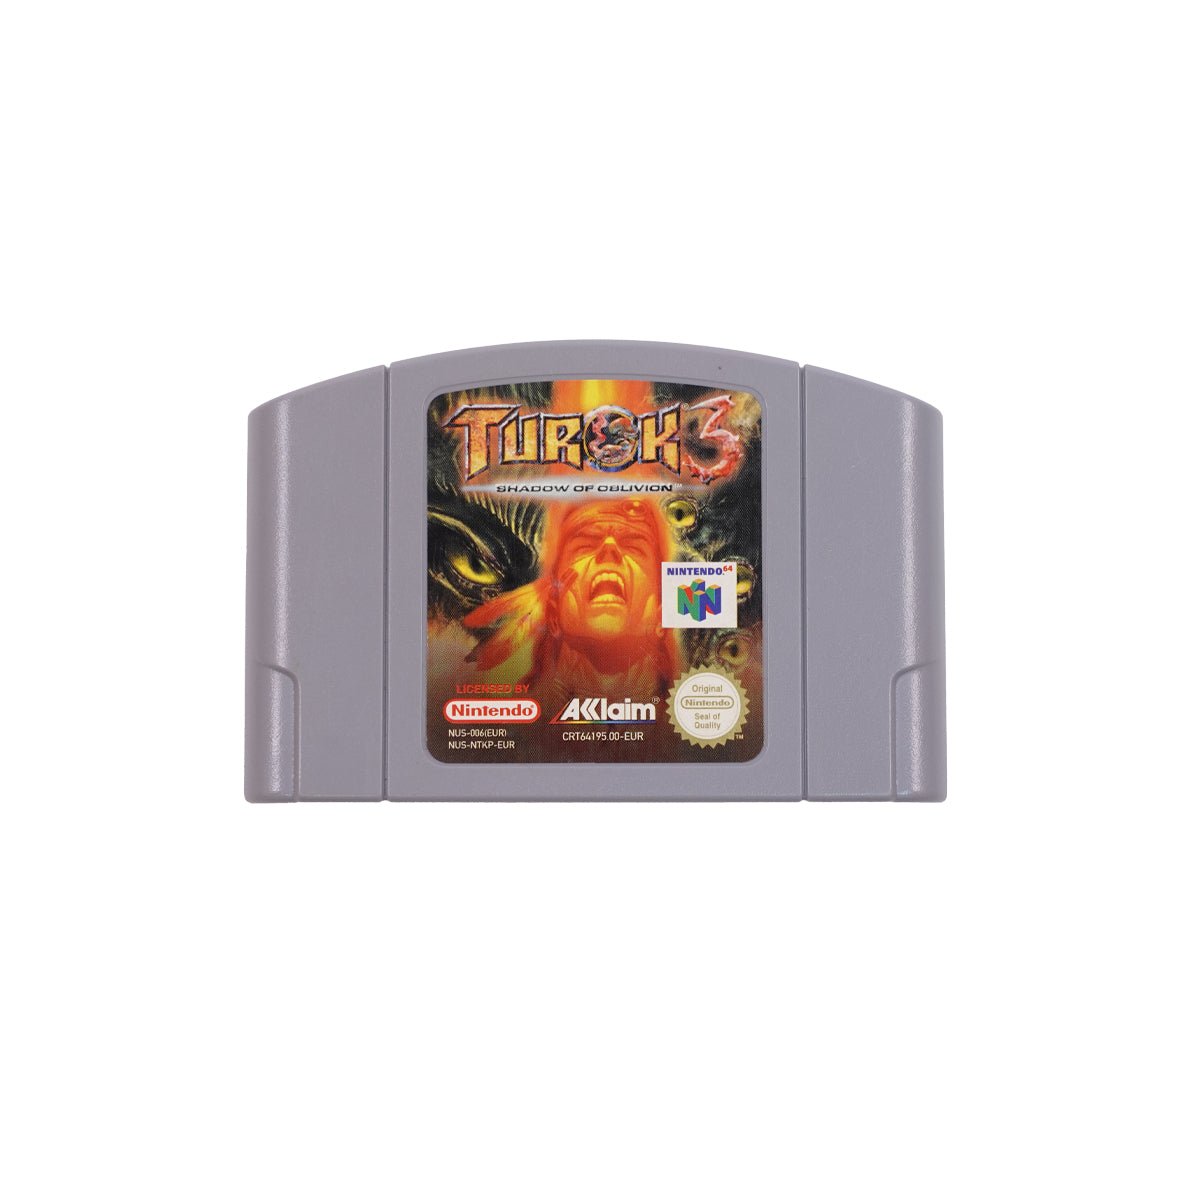 (Pre-Owned) Turok 3: Shadow of Oblivion Video Game For Nintendo 64 - Store 974 | ستور ٩٧٤